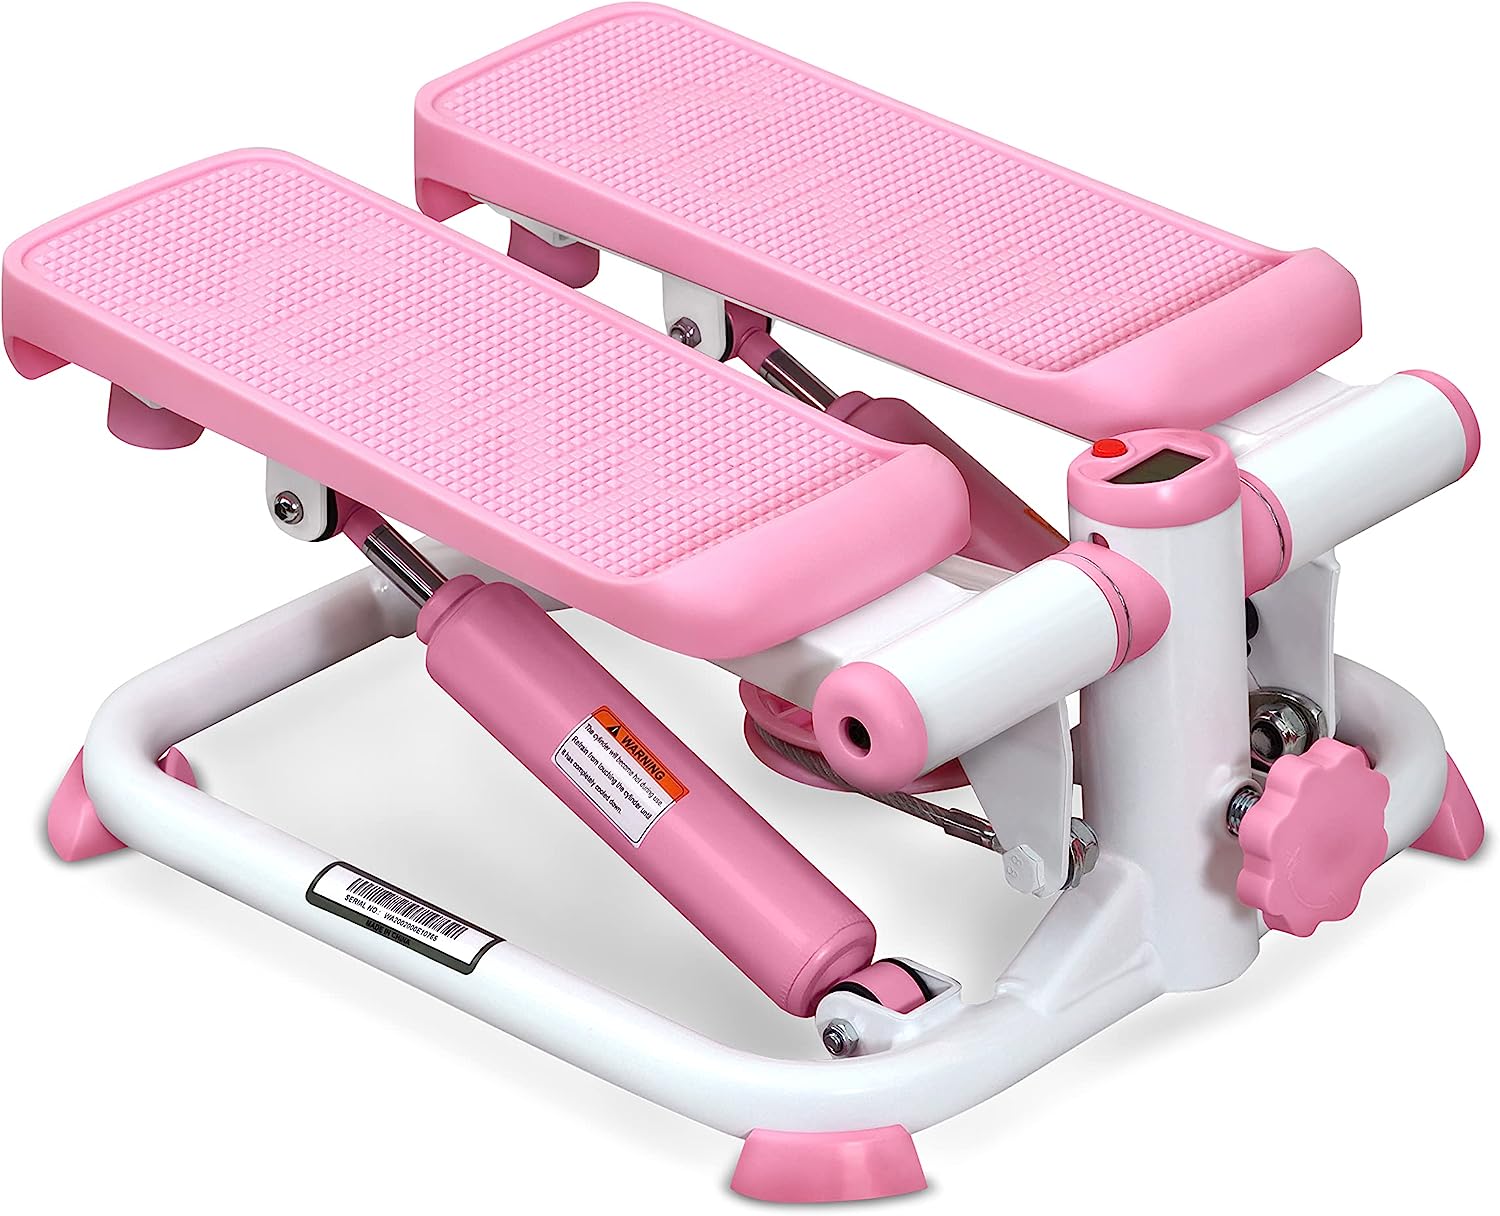 Sunny Health  Fitness Exercise Stepping Machine, Portable Mini Stair Stepper for Home, Desk or Office Workouts in Pink